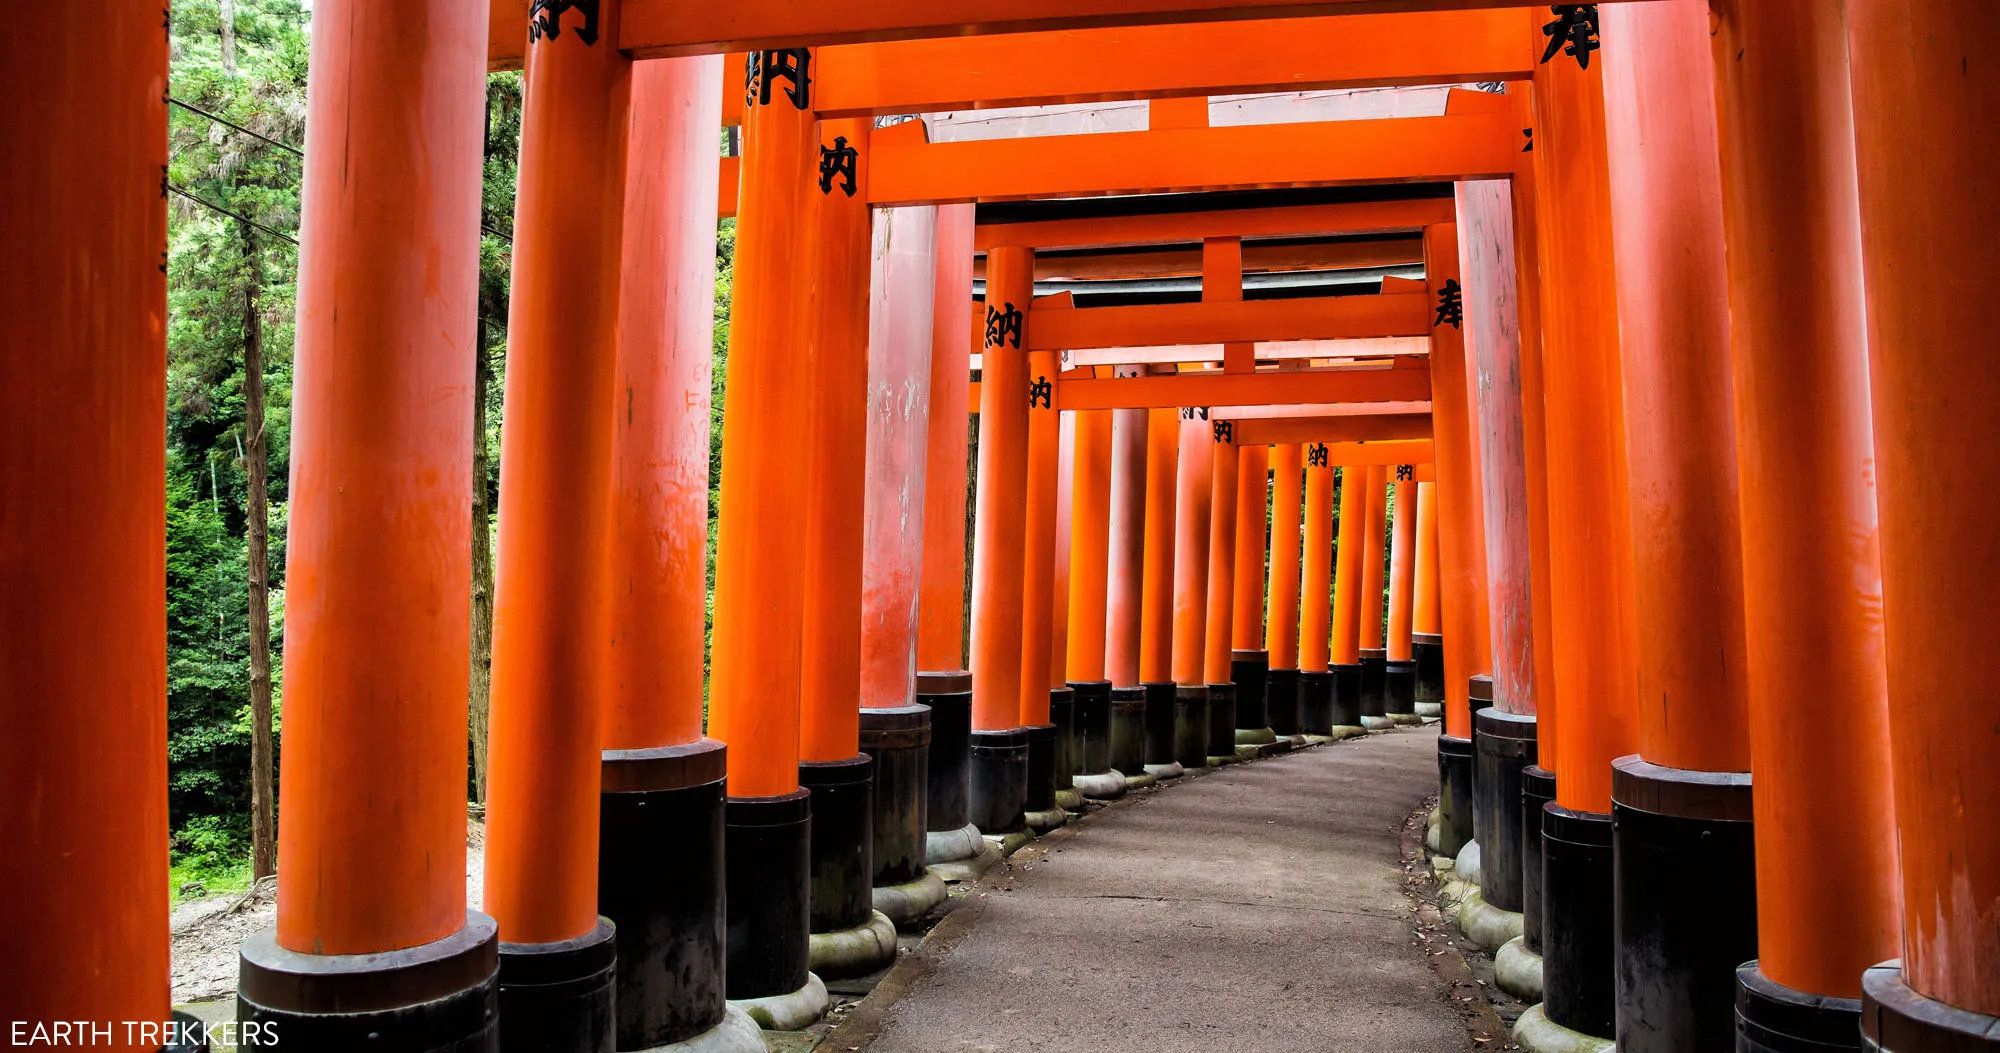 Featured image for “Kyoto Bucket List: 18 Amazing Things to do in Kyoto, Japan”